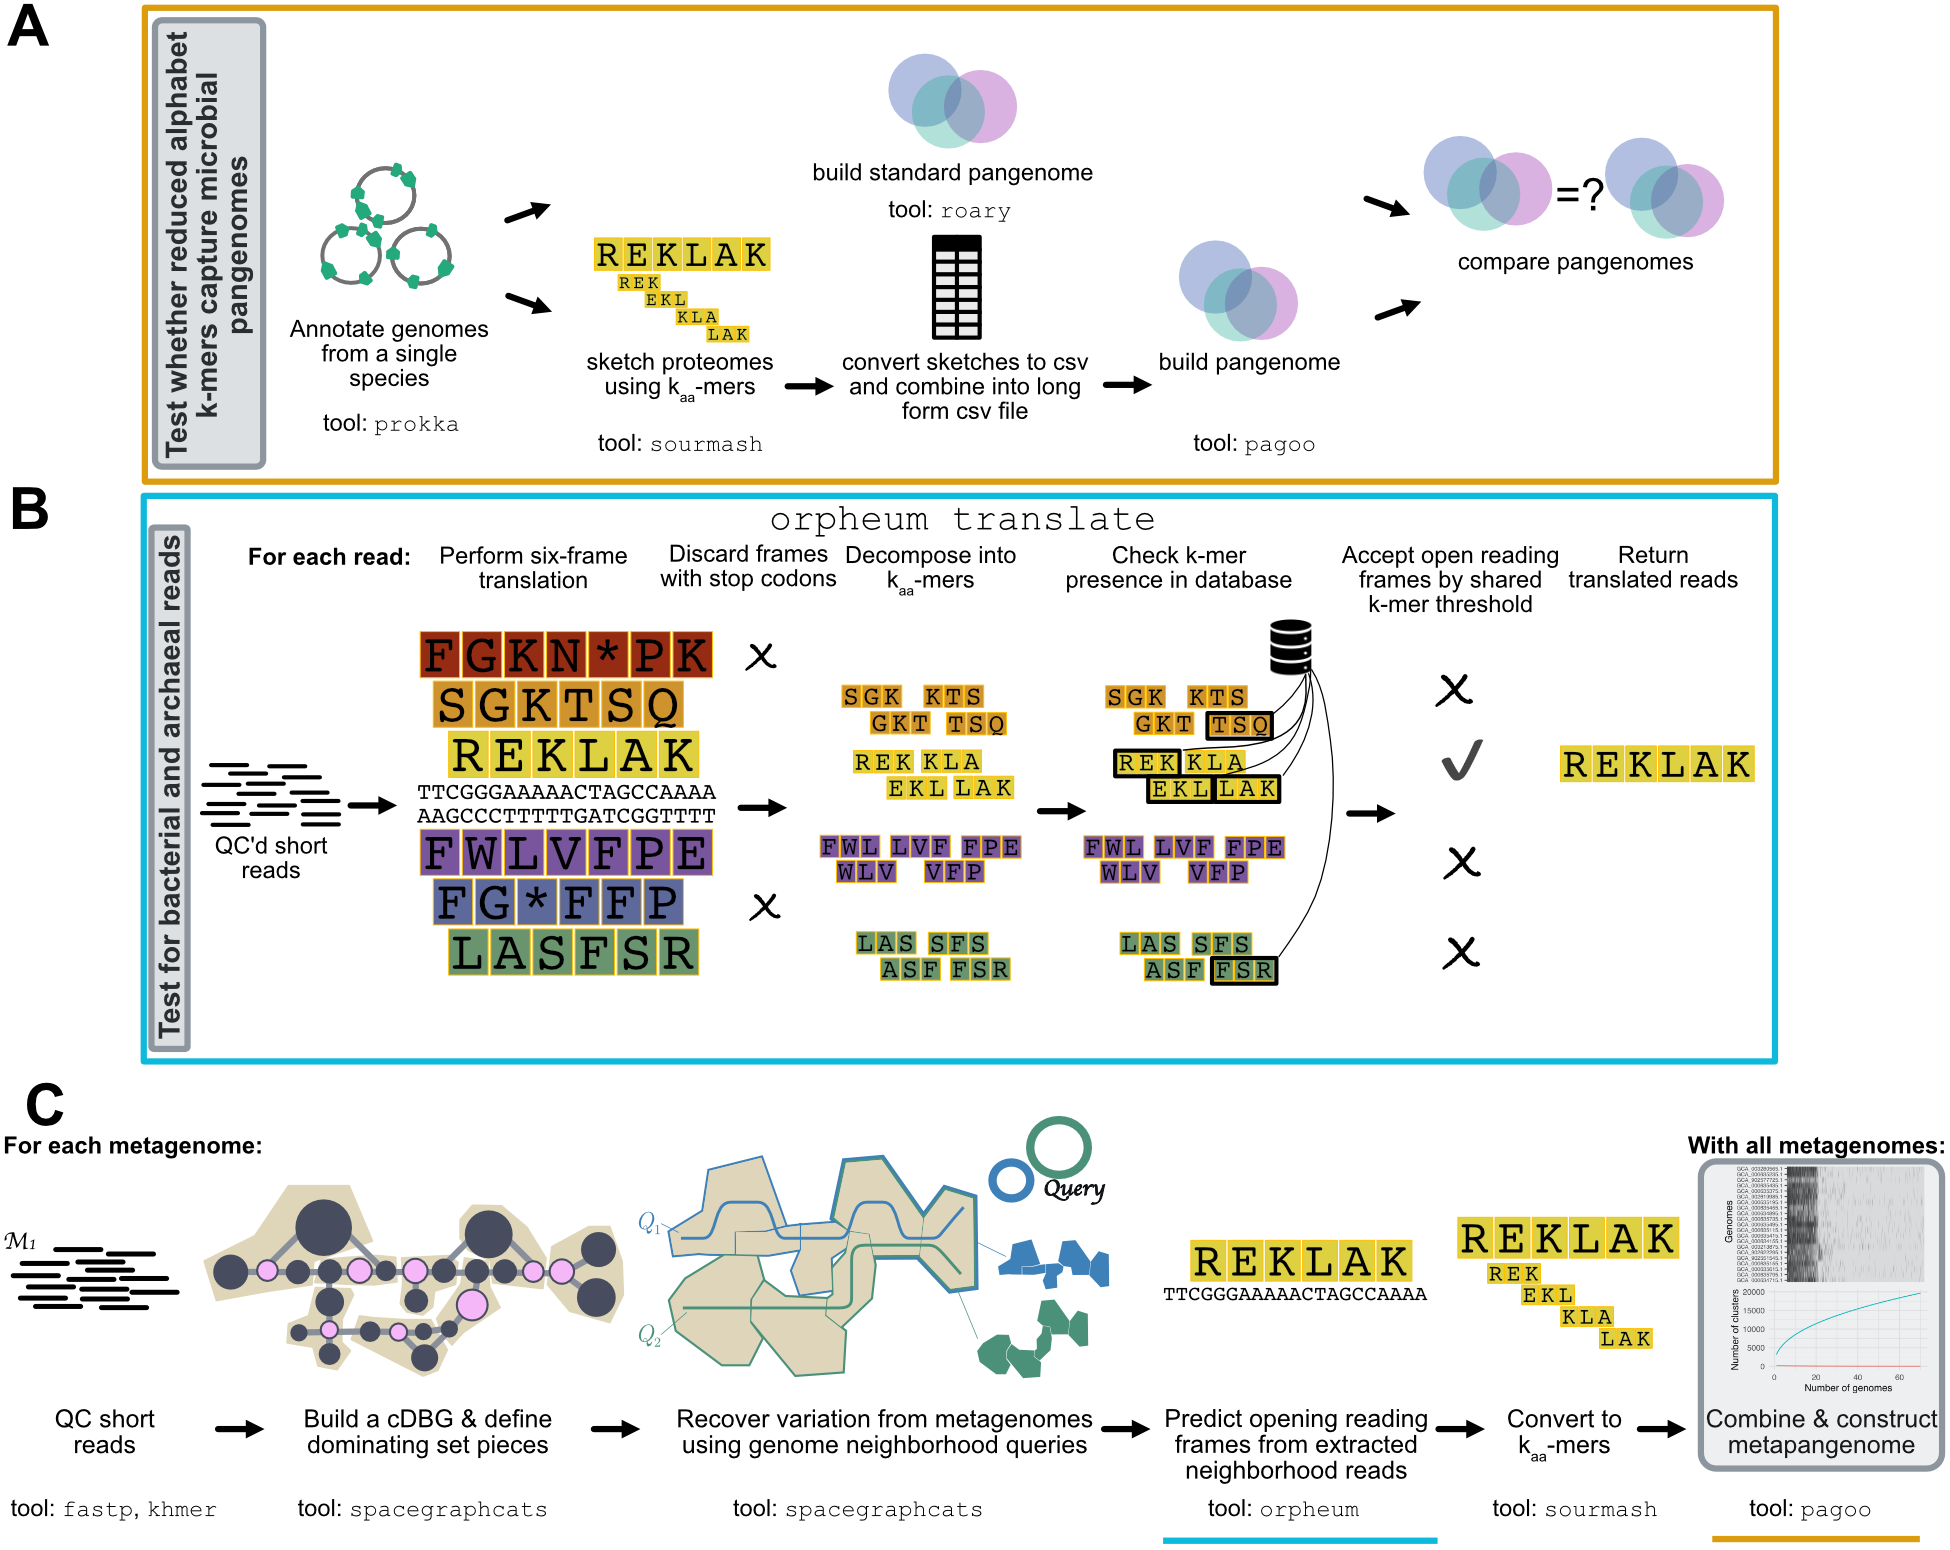 Figure 1: Overview of the pipeline used to build metapangenomes. Approaches that were developed or tested in this manuscript are outlined in grey. A) We tested whether amino acid k-mers could accurately represent bacterial and archaeal pangenomes. Using genomes annotated with prokka, we compared pangenomes built with roary, a field-standard pipeline, against pangenomes built with kaa-mer sketches. B) We tested whether open reading frames could be predicted directly from short sequencing reads using the tool orpheum. This panel is modified from [25]. C) We combined this approaches with metagenome assembly graph genome queries to estimate metapangenomes directly from metagenomes without assembly or binning. The blue and orange lines correspond to steps tested in panels A and B. The workflow presented in steps 1-3 of panel C is published in [21].